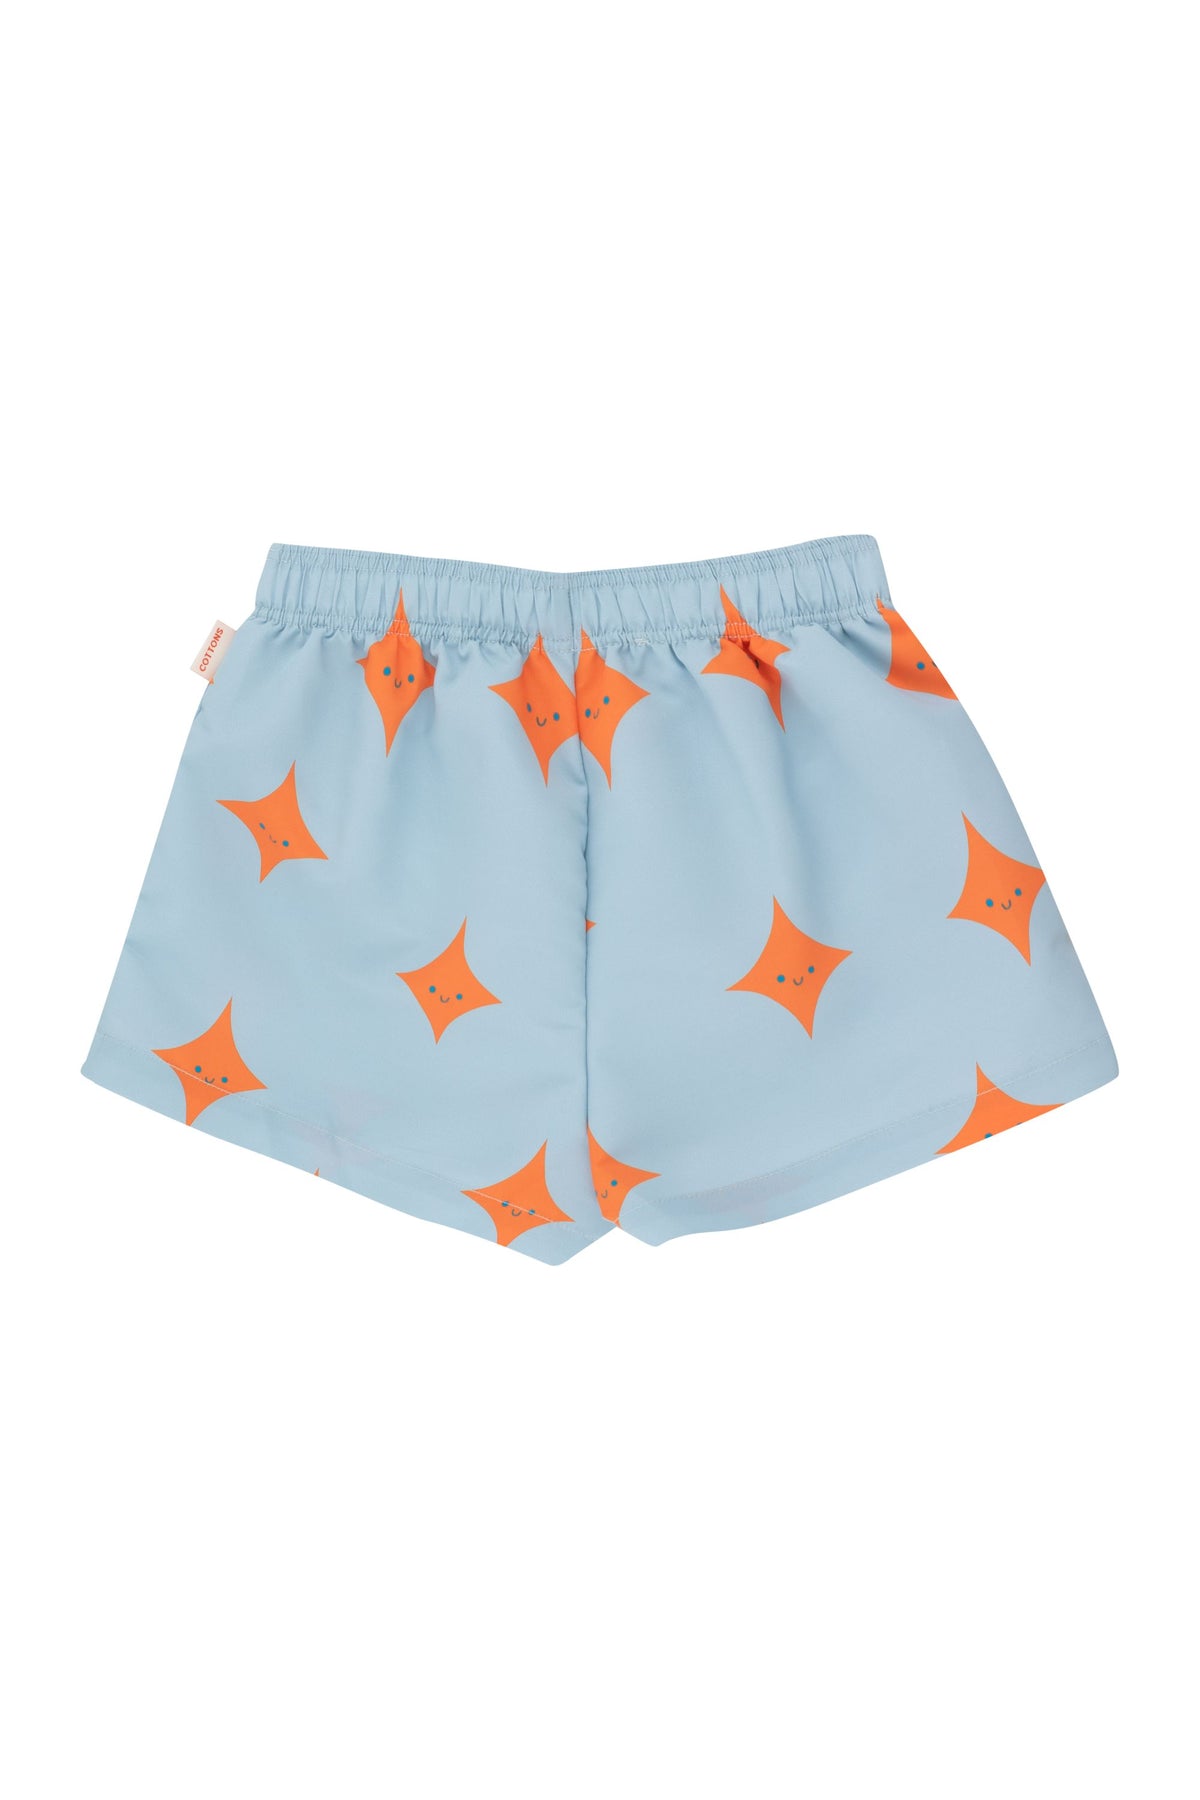 tiny cottons sparkle trunks - washed blue